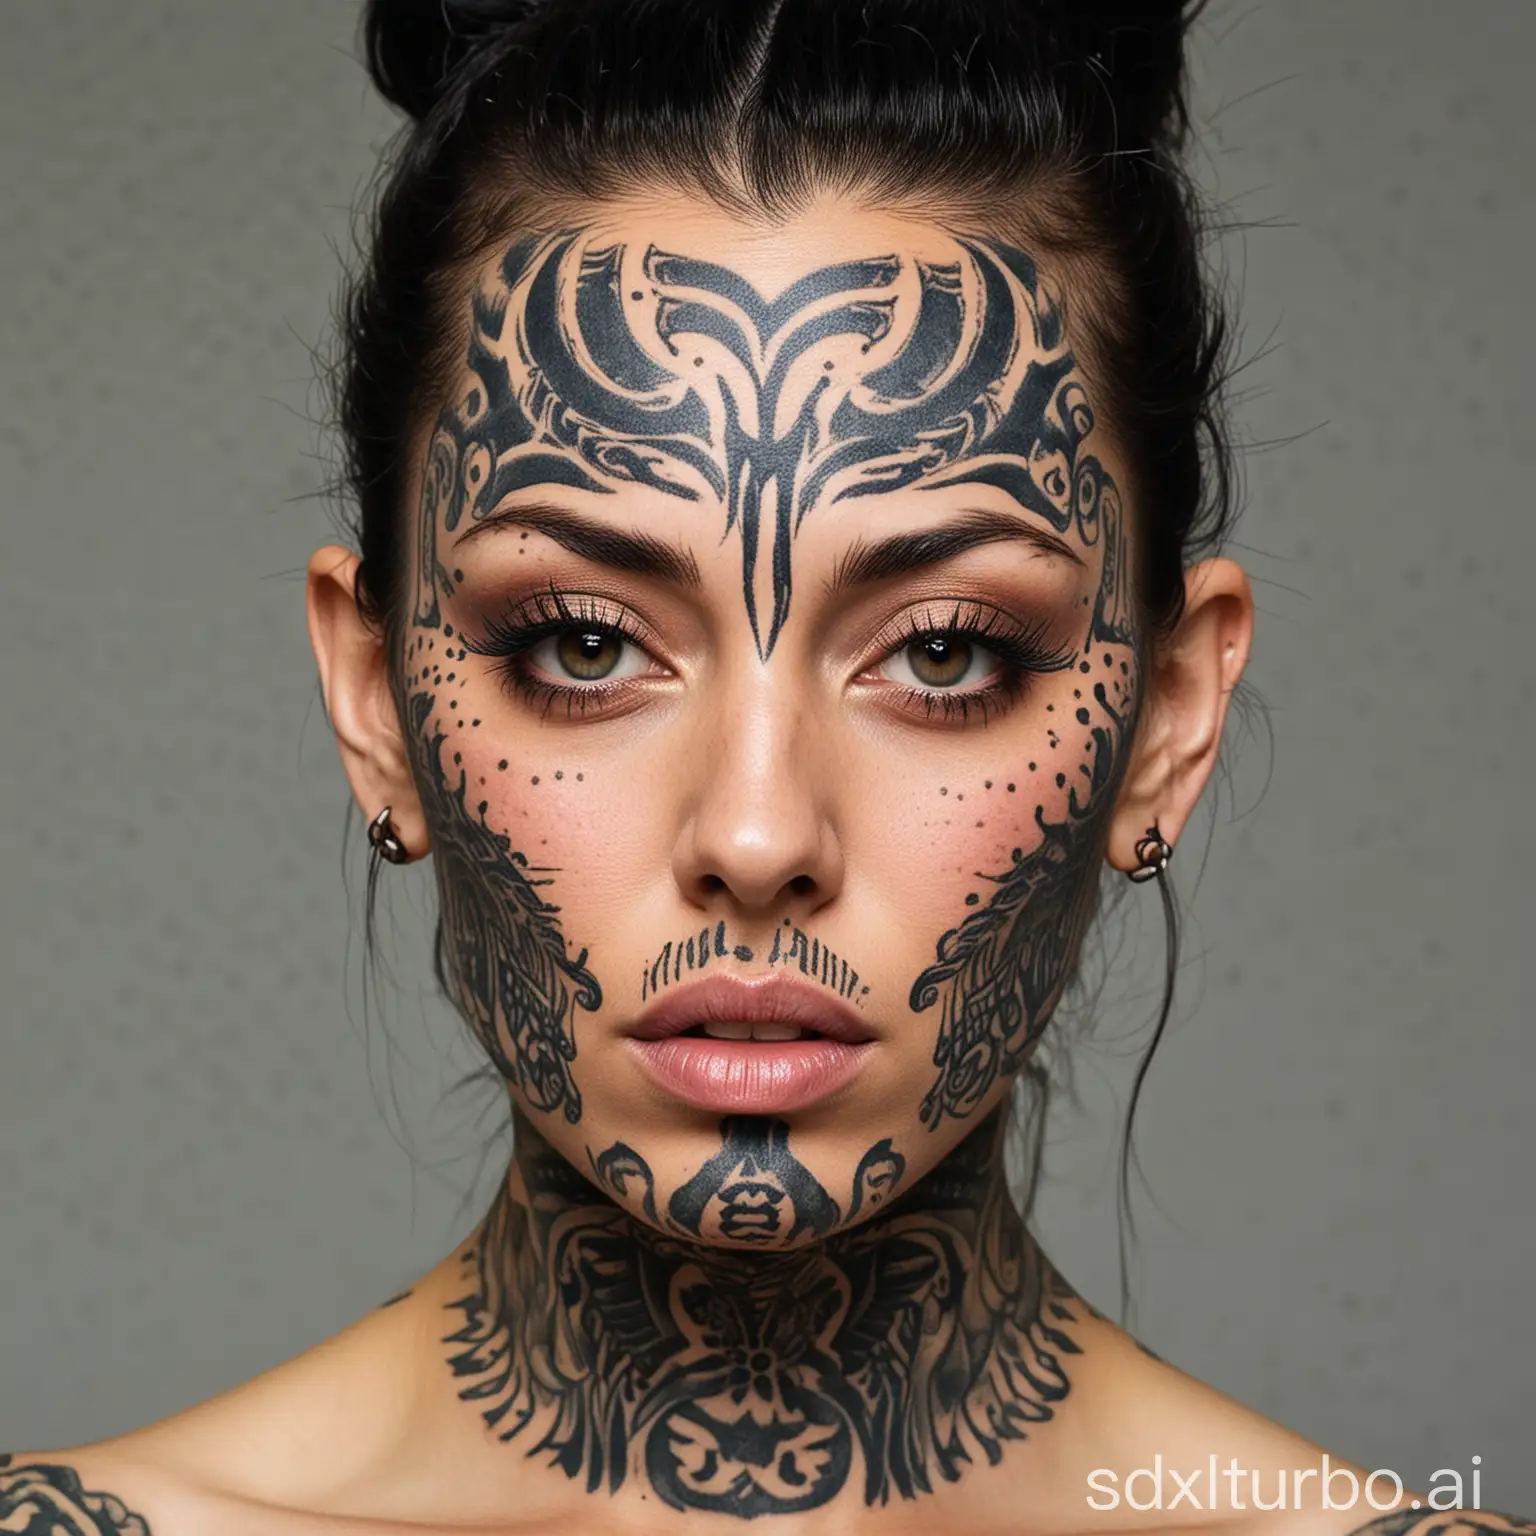 A woman with extreme tattoos all over her face